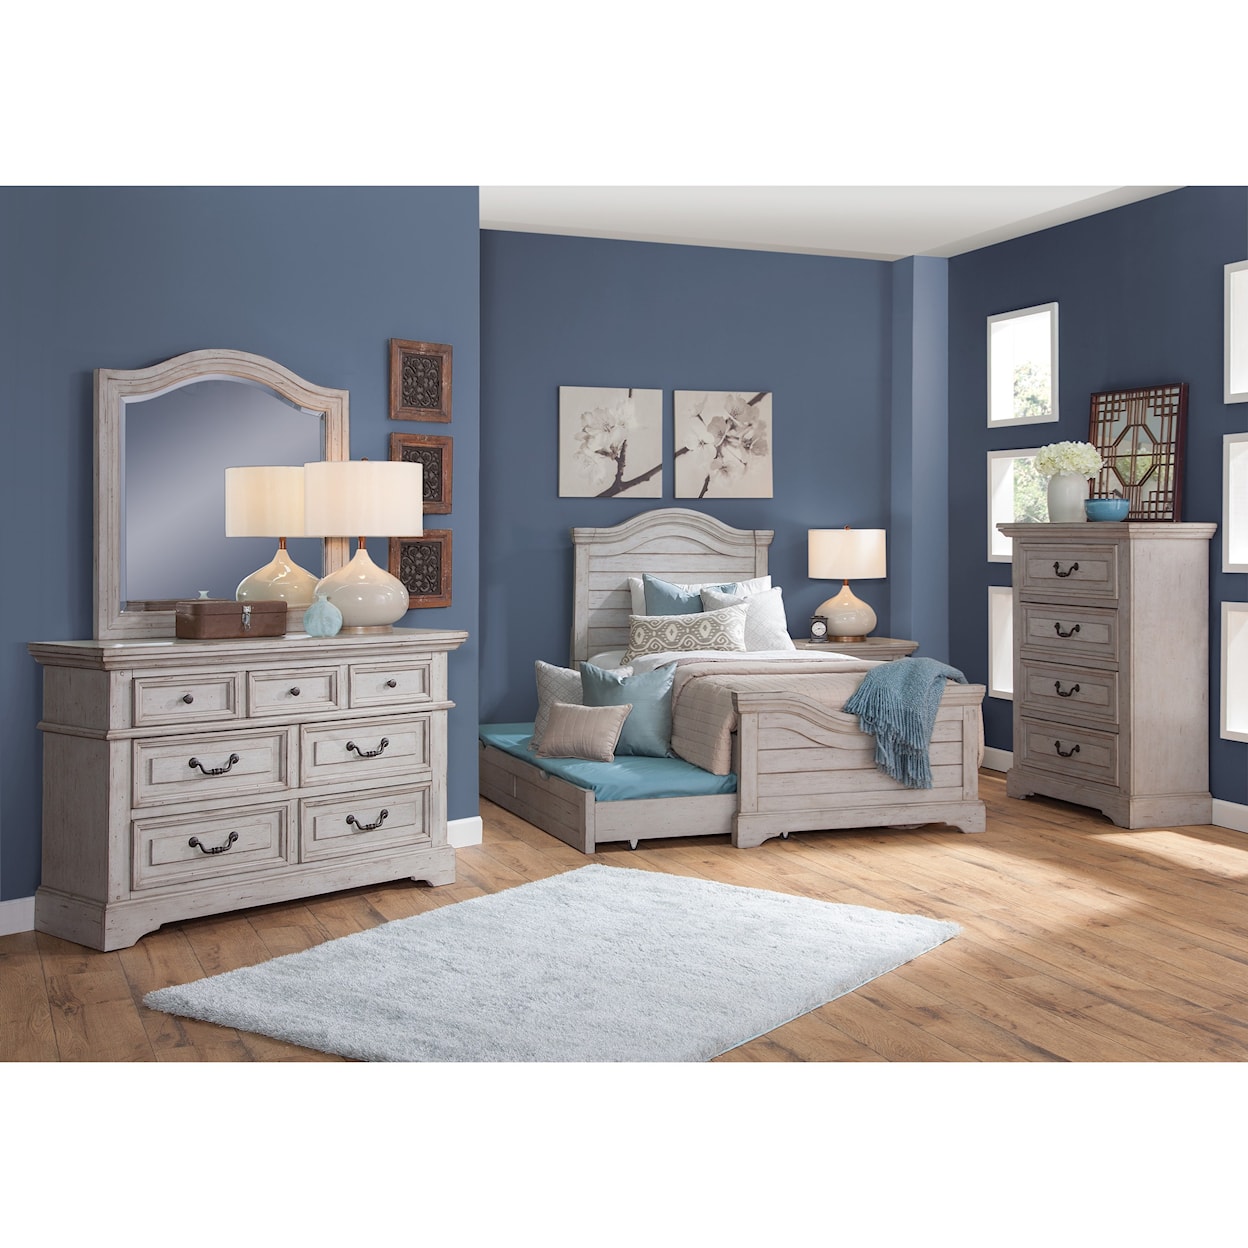 American Woodcrafters Stonebrook Youth Twin Bedroom Group